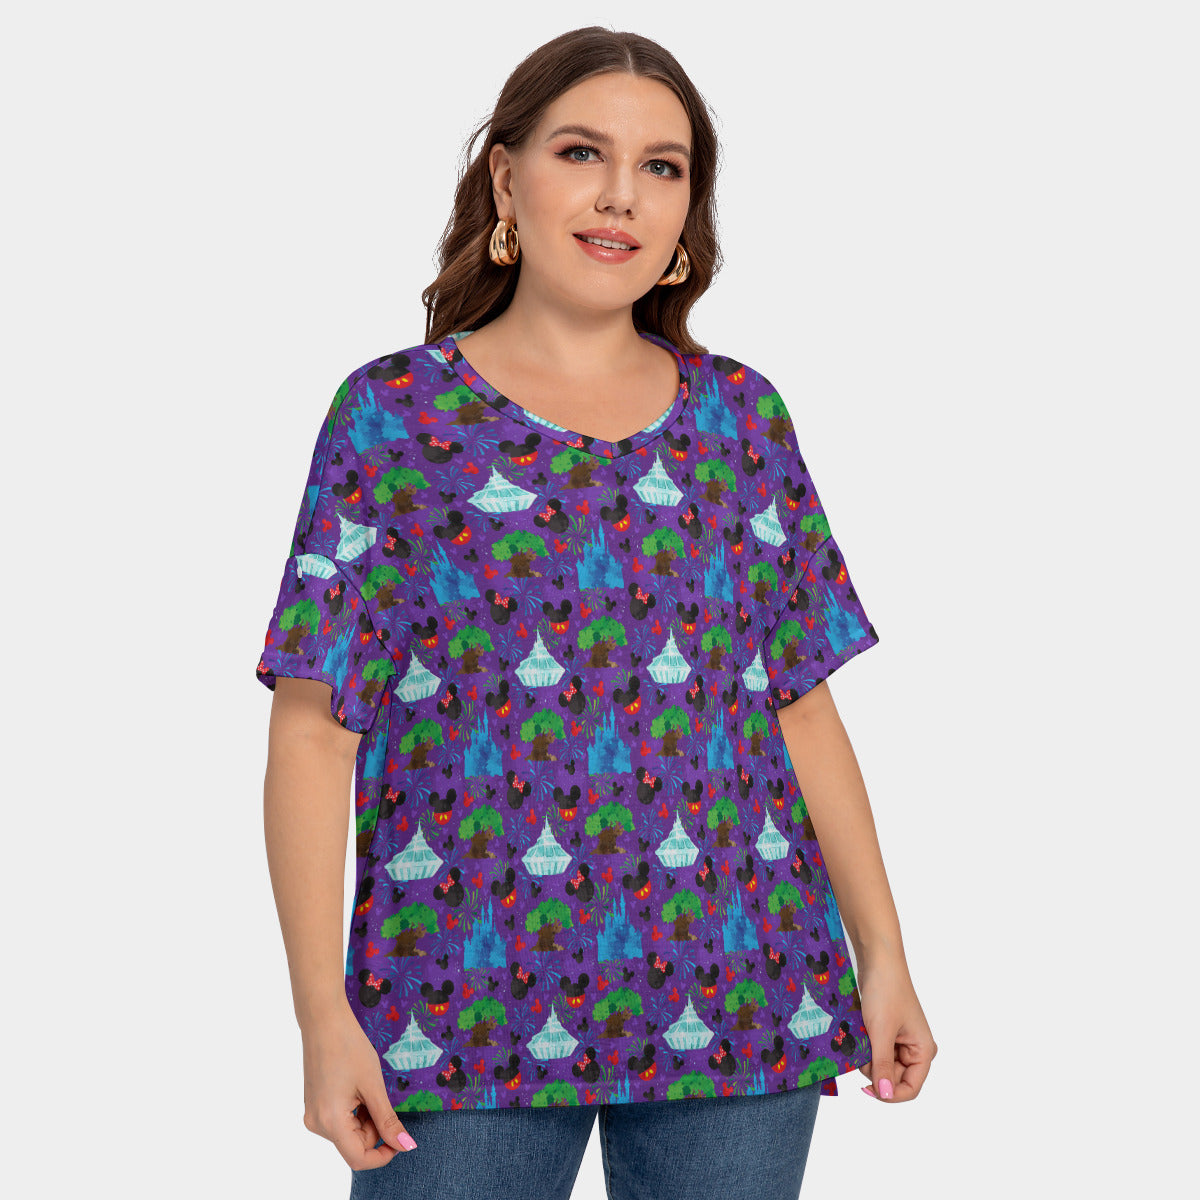 Park Hopper Fireworks Women's Plus Size Short Sleeve T-shirt With Sleeve Loops